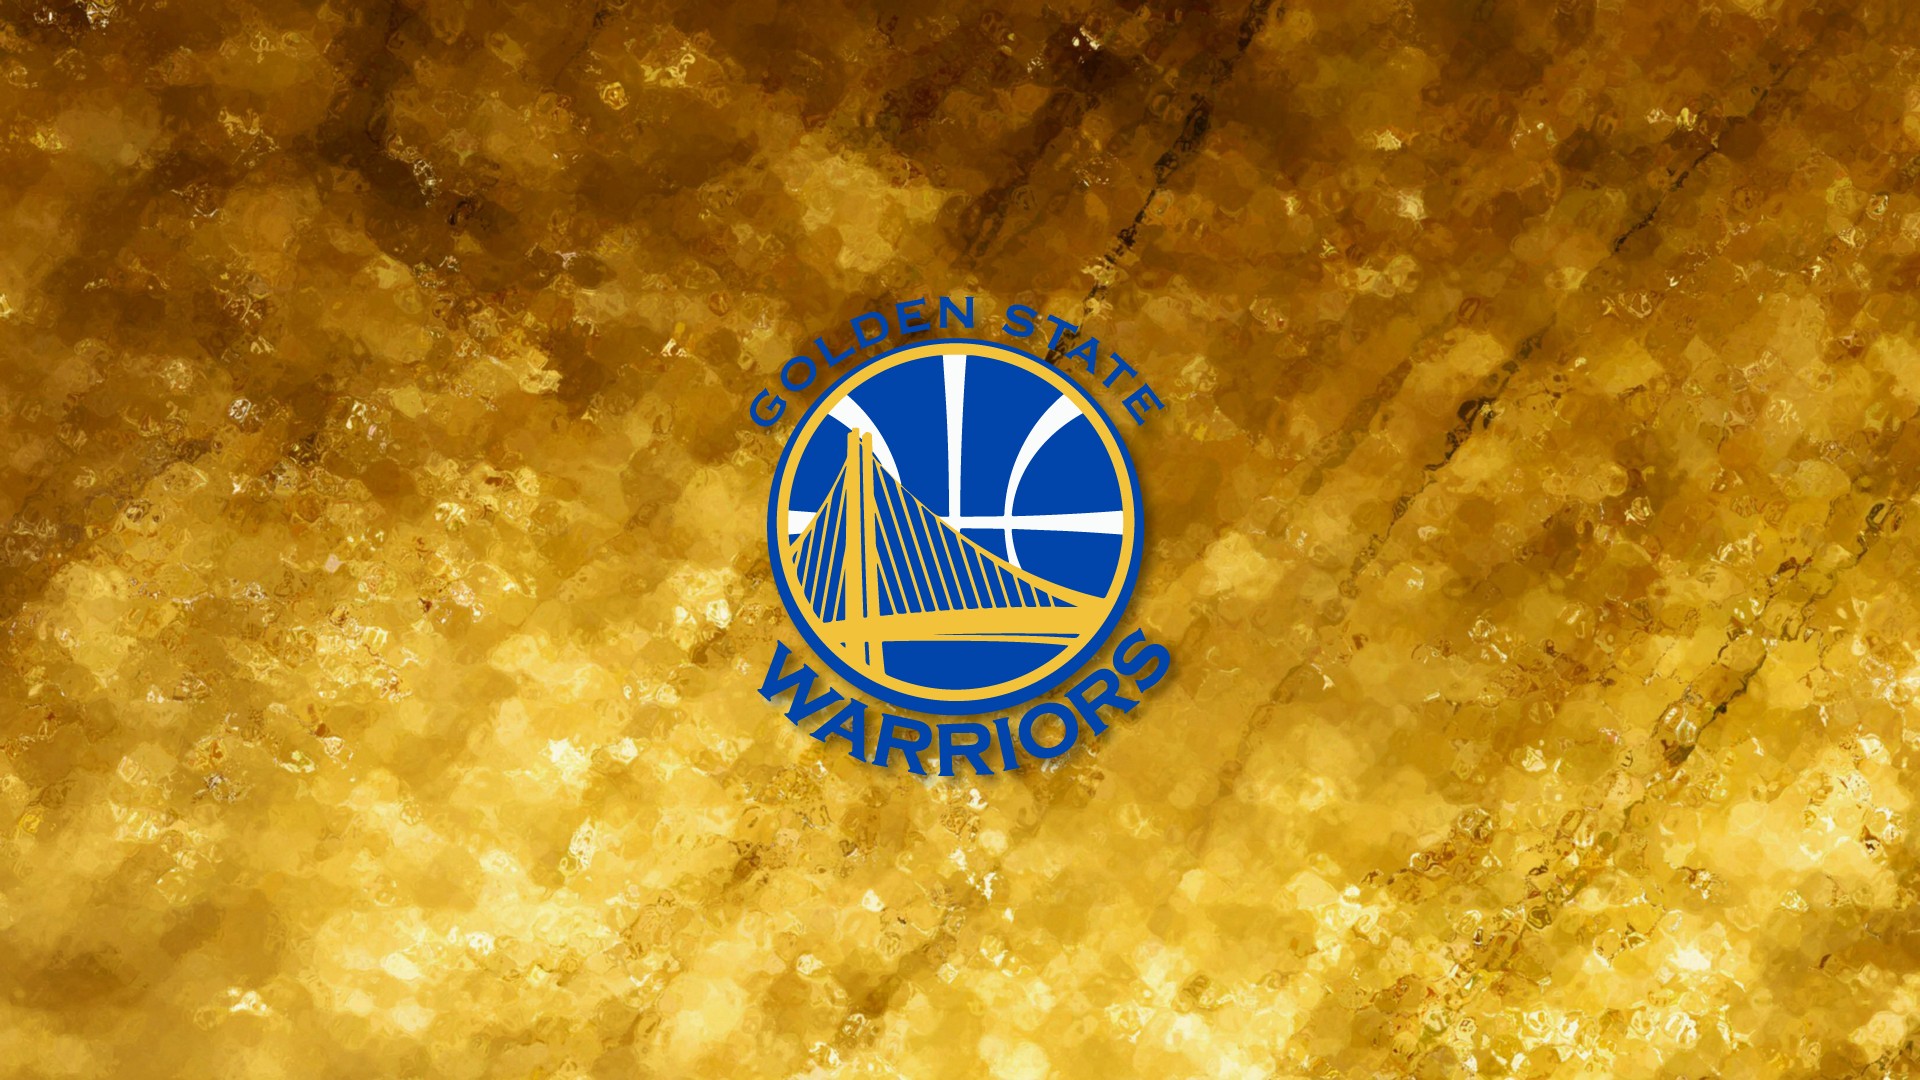 Best Golden State Warriors Wallpaper with image resolution 1920x1080 pixel. You can use this wallpaper as background for your desktop Computer Screensavers, Android or iPhone smartphones